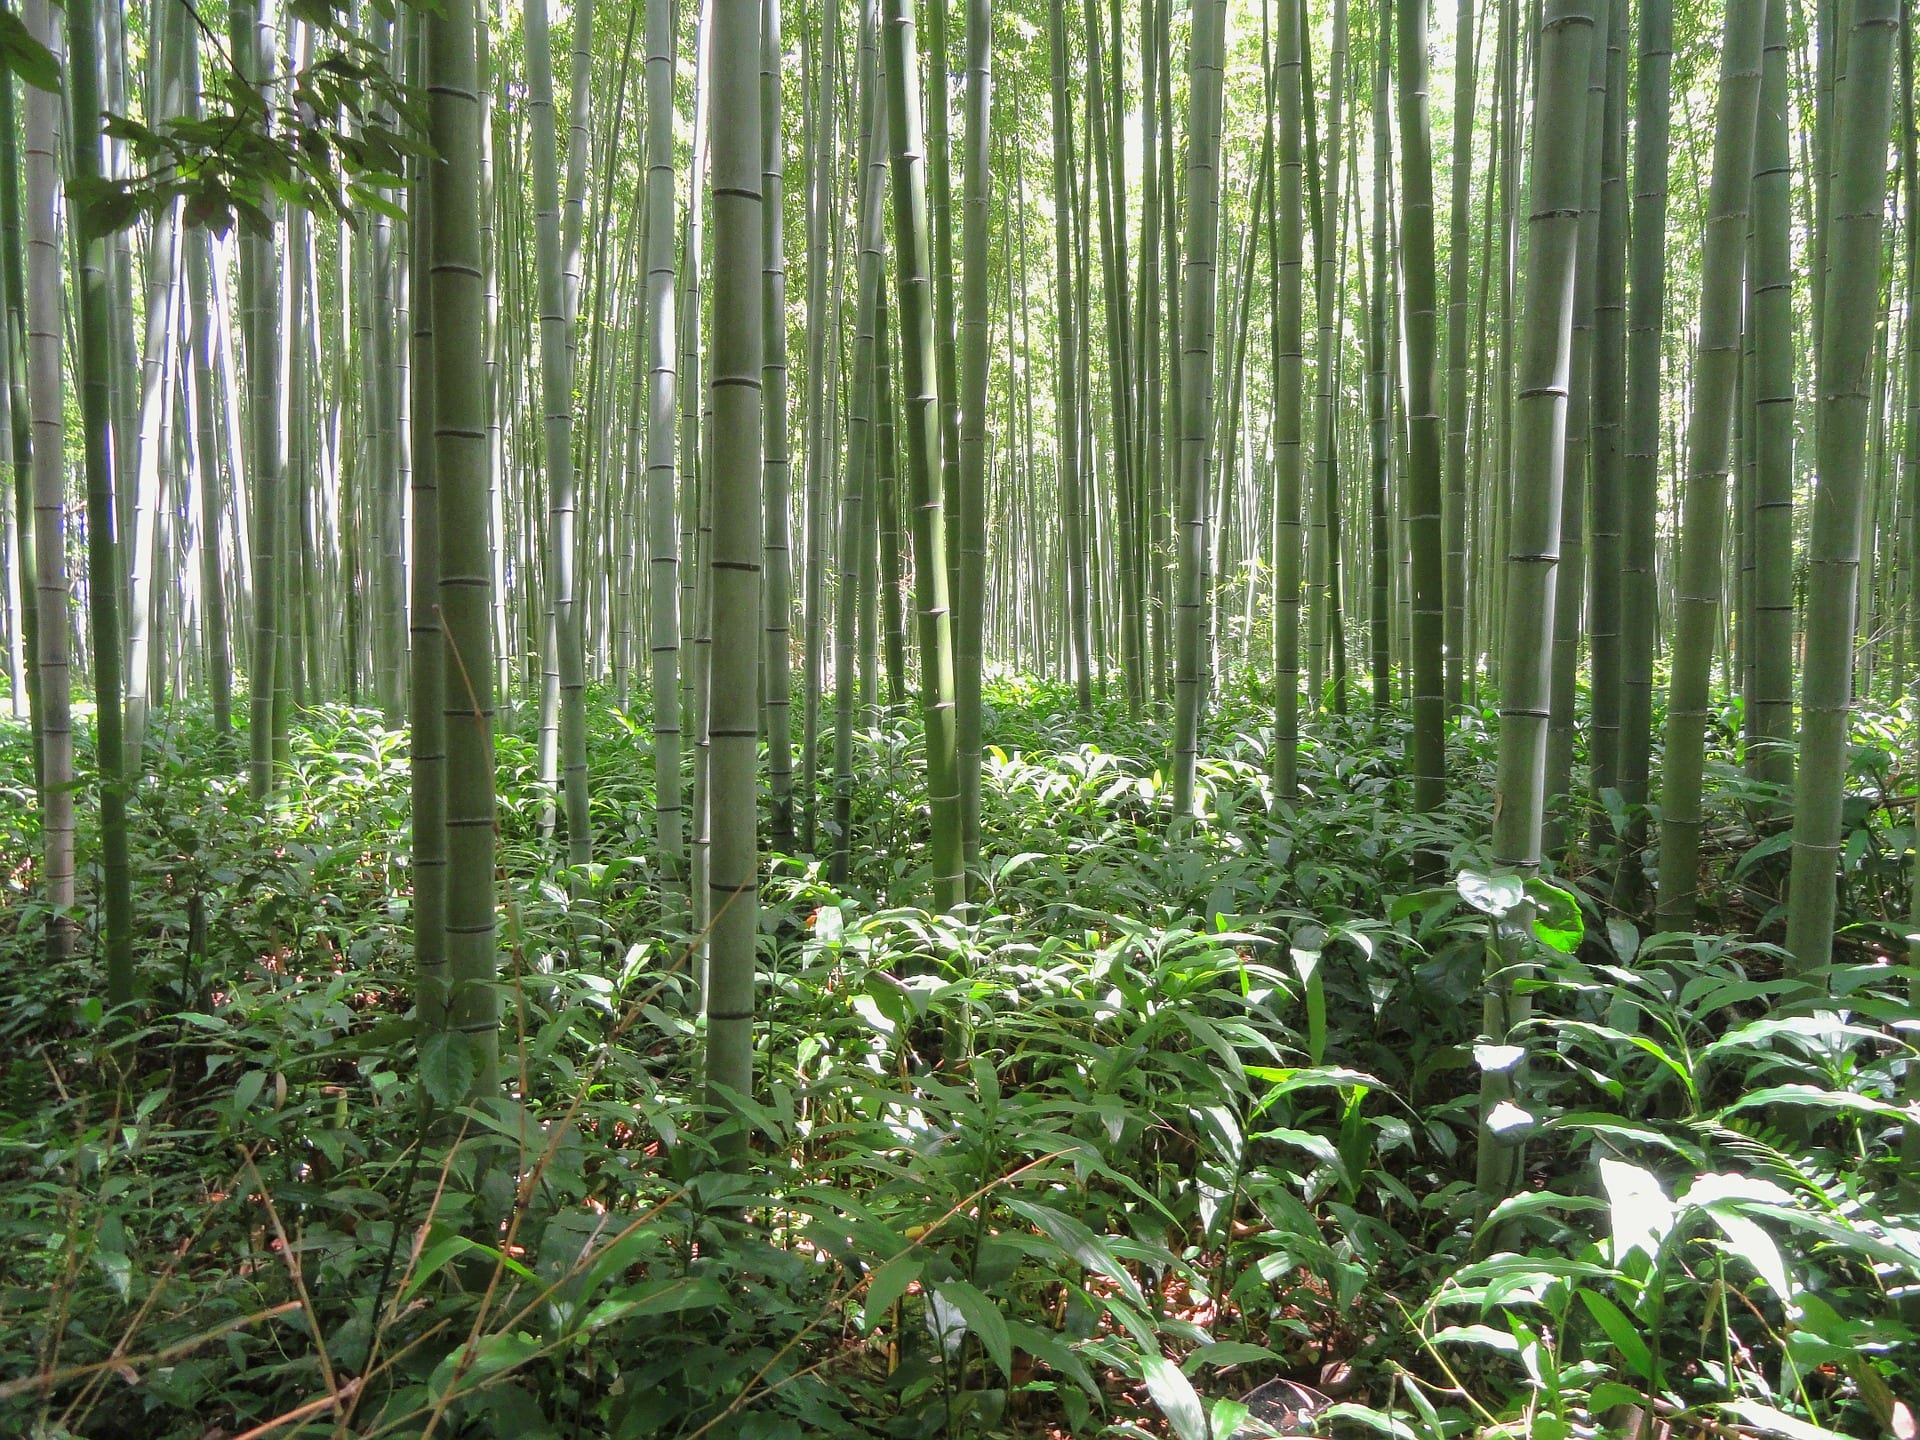 Investing in bamboo
